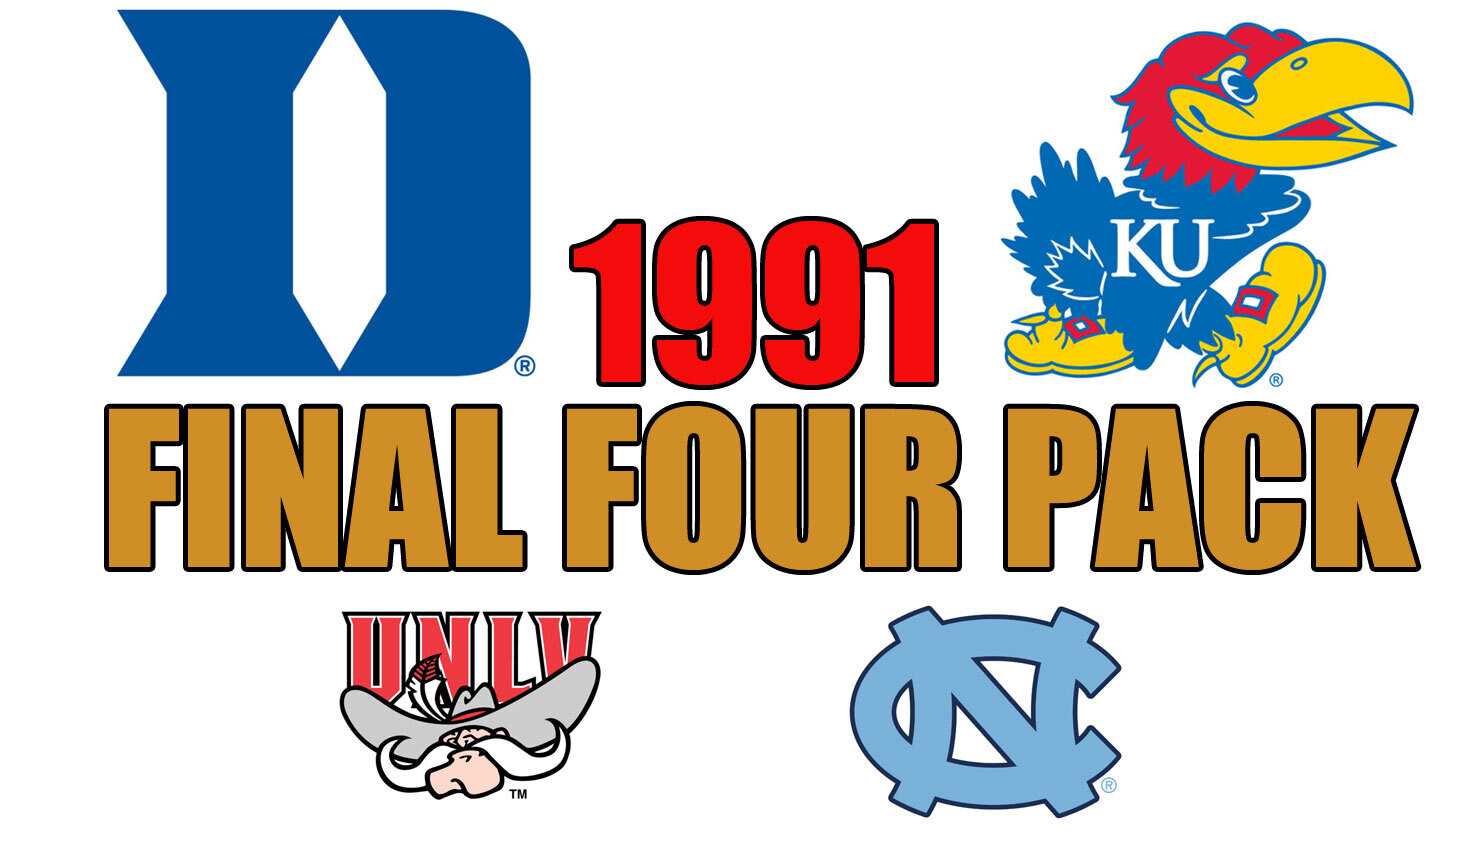 1991 Final Four Pack (BL Library)